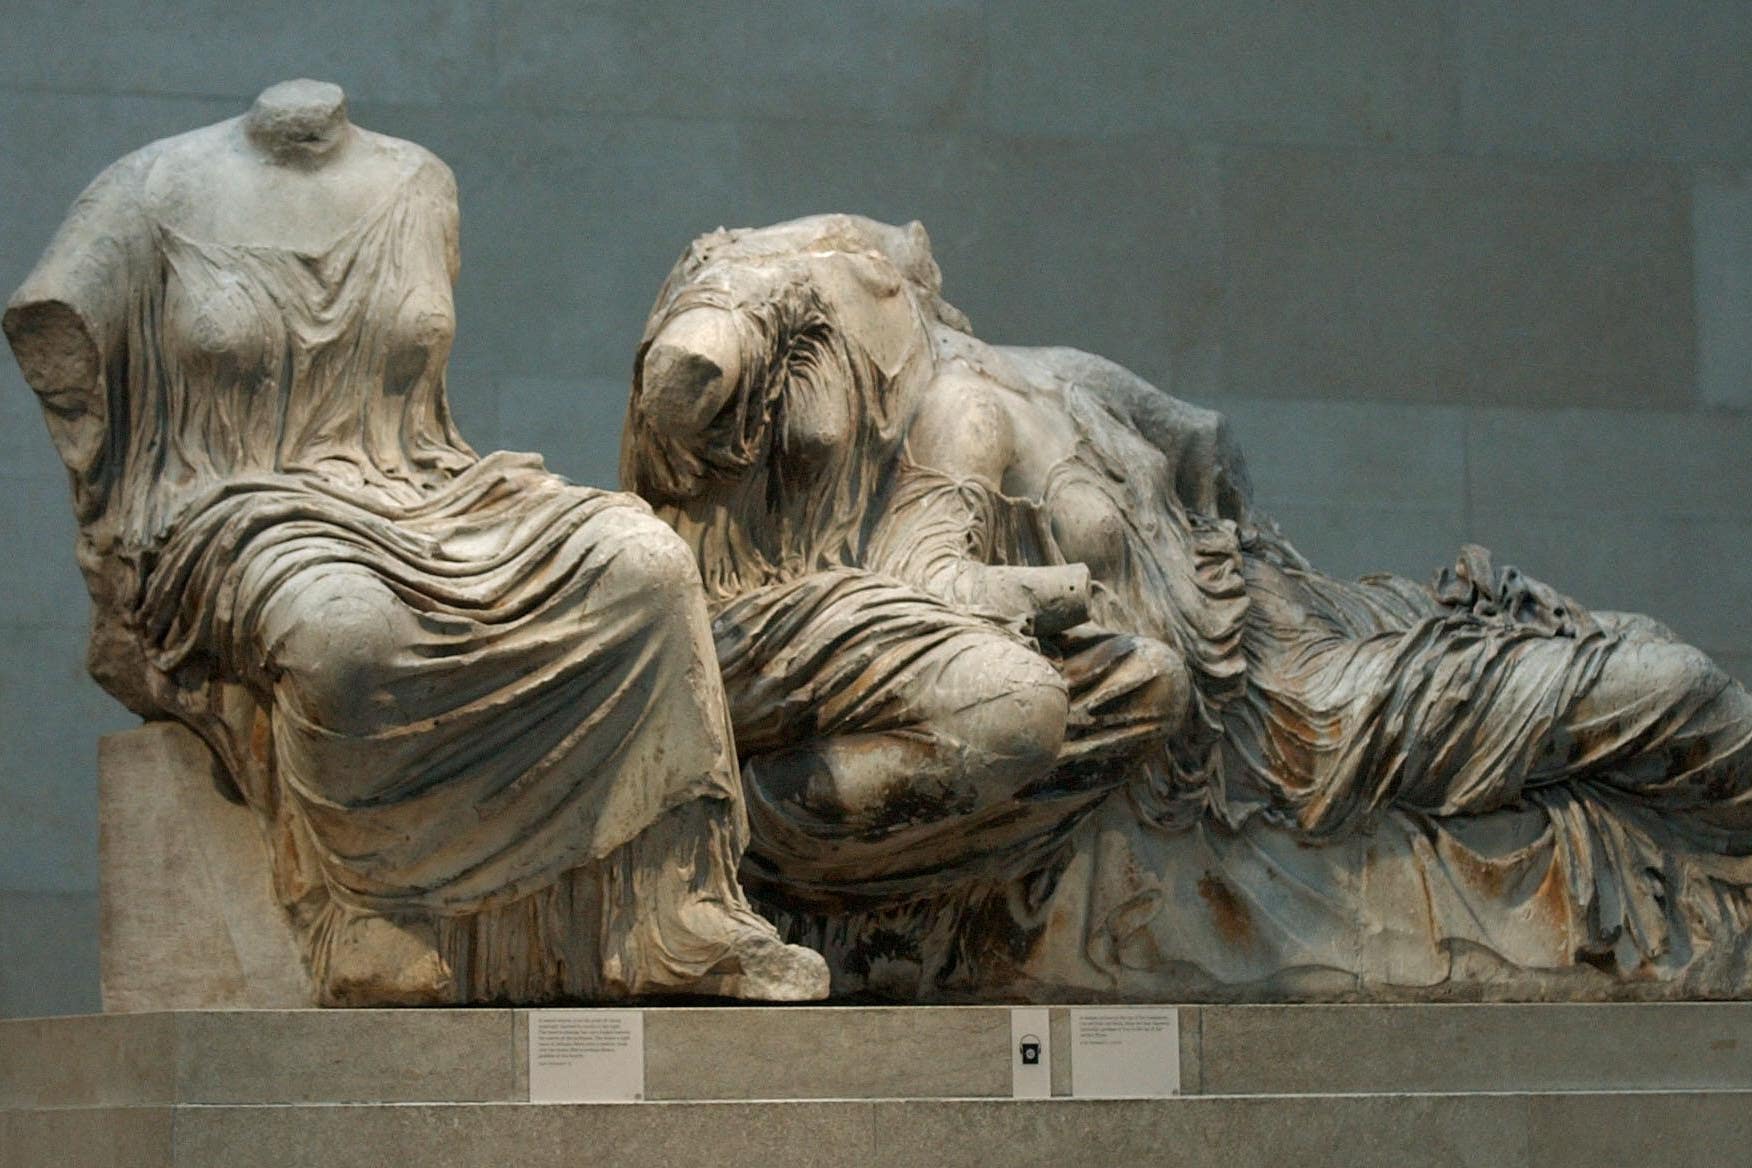 The Parthenon marbles were all sawn off or hacked off with axes in the early 19th century by a syphilitic Tory minor aristocrat